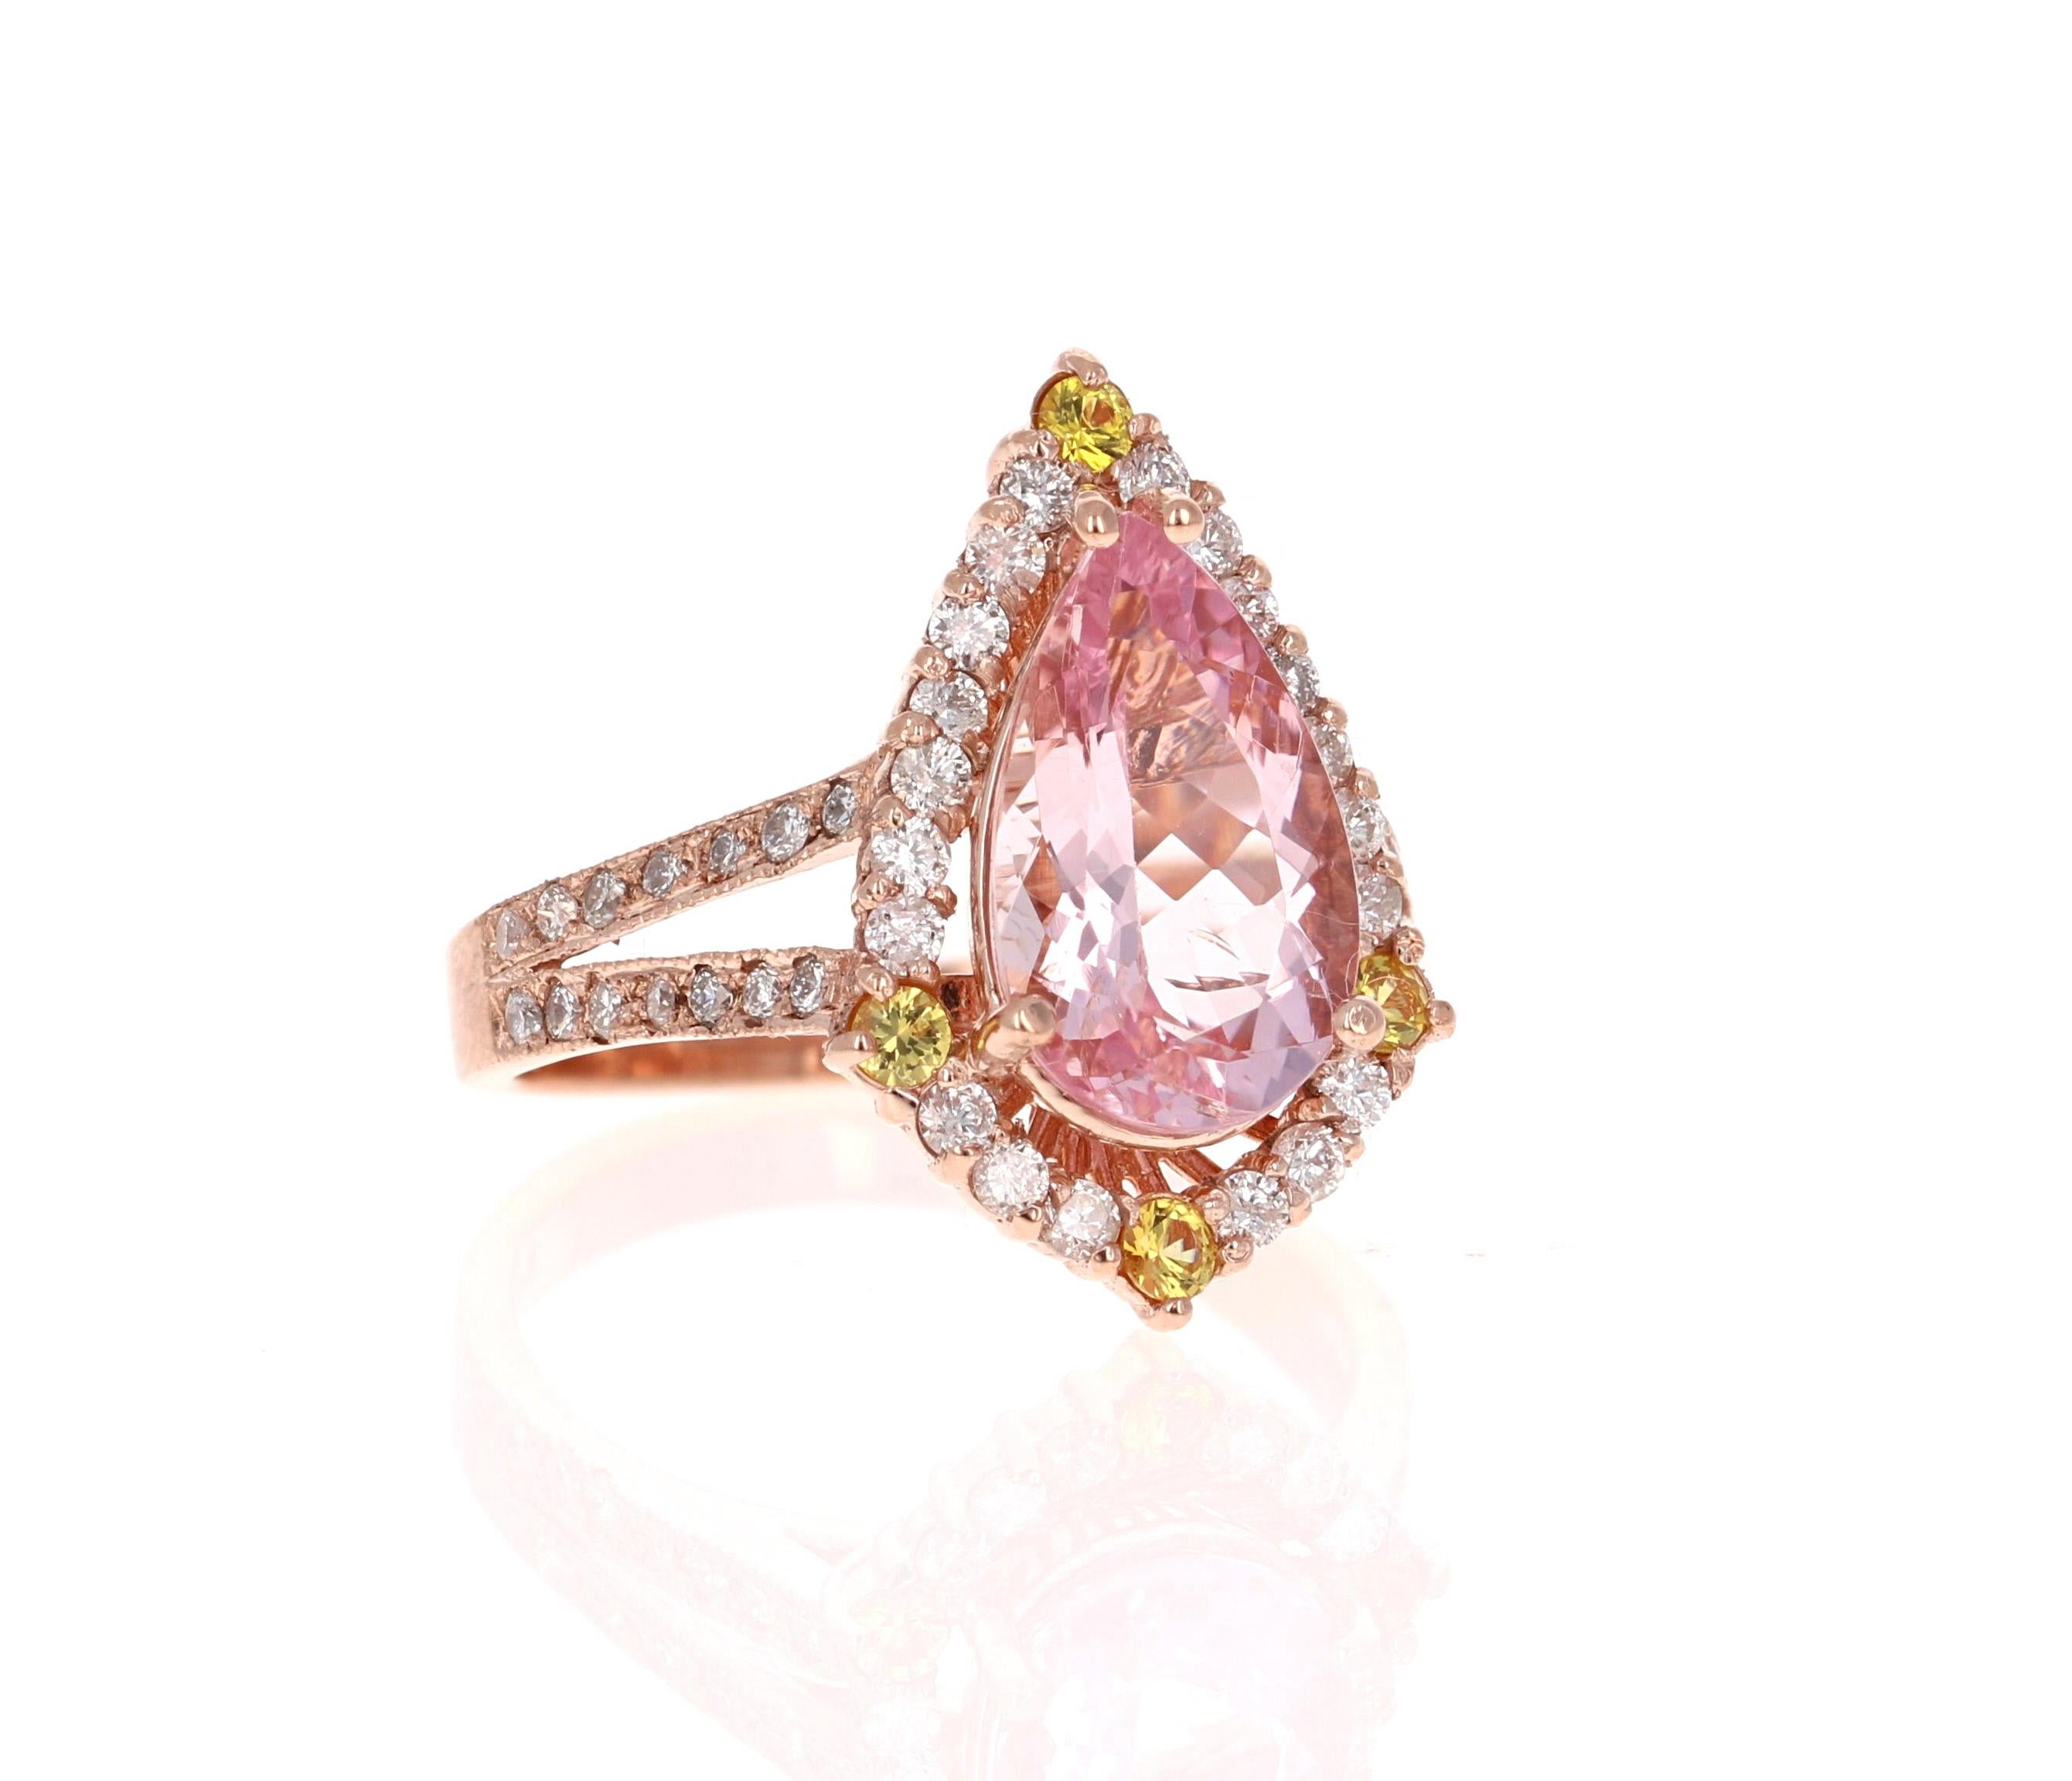 A lovely Engagement Ring Option or as an alternate to a Pink Diamond Ring! 

This gorgeous and classy Morganite, Yellow Sapphire and Diamond Ring has a 2.59 Carat Pear Cut Pink Morganite and has 48 Round Cut Diamonds that weigh 0.65 Carats (Clarity: